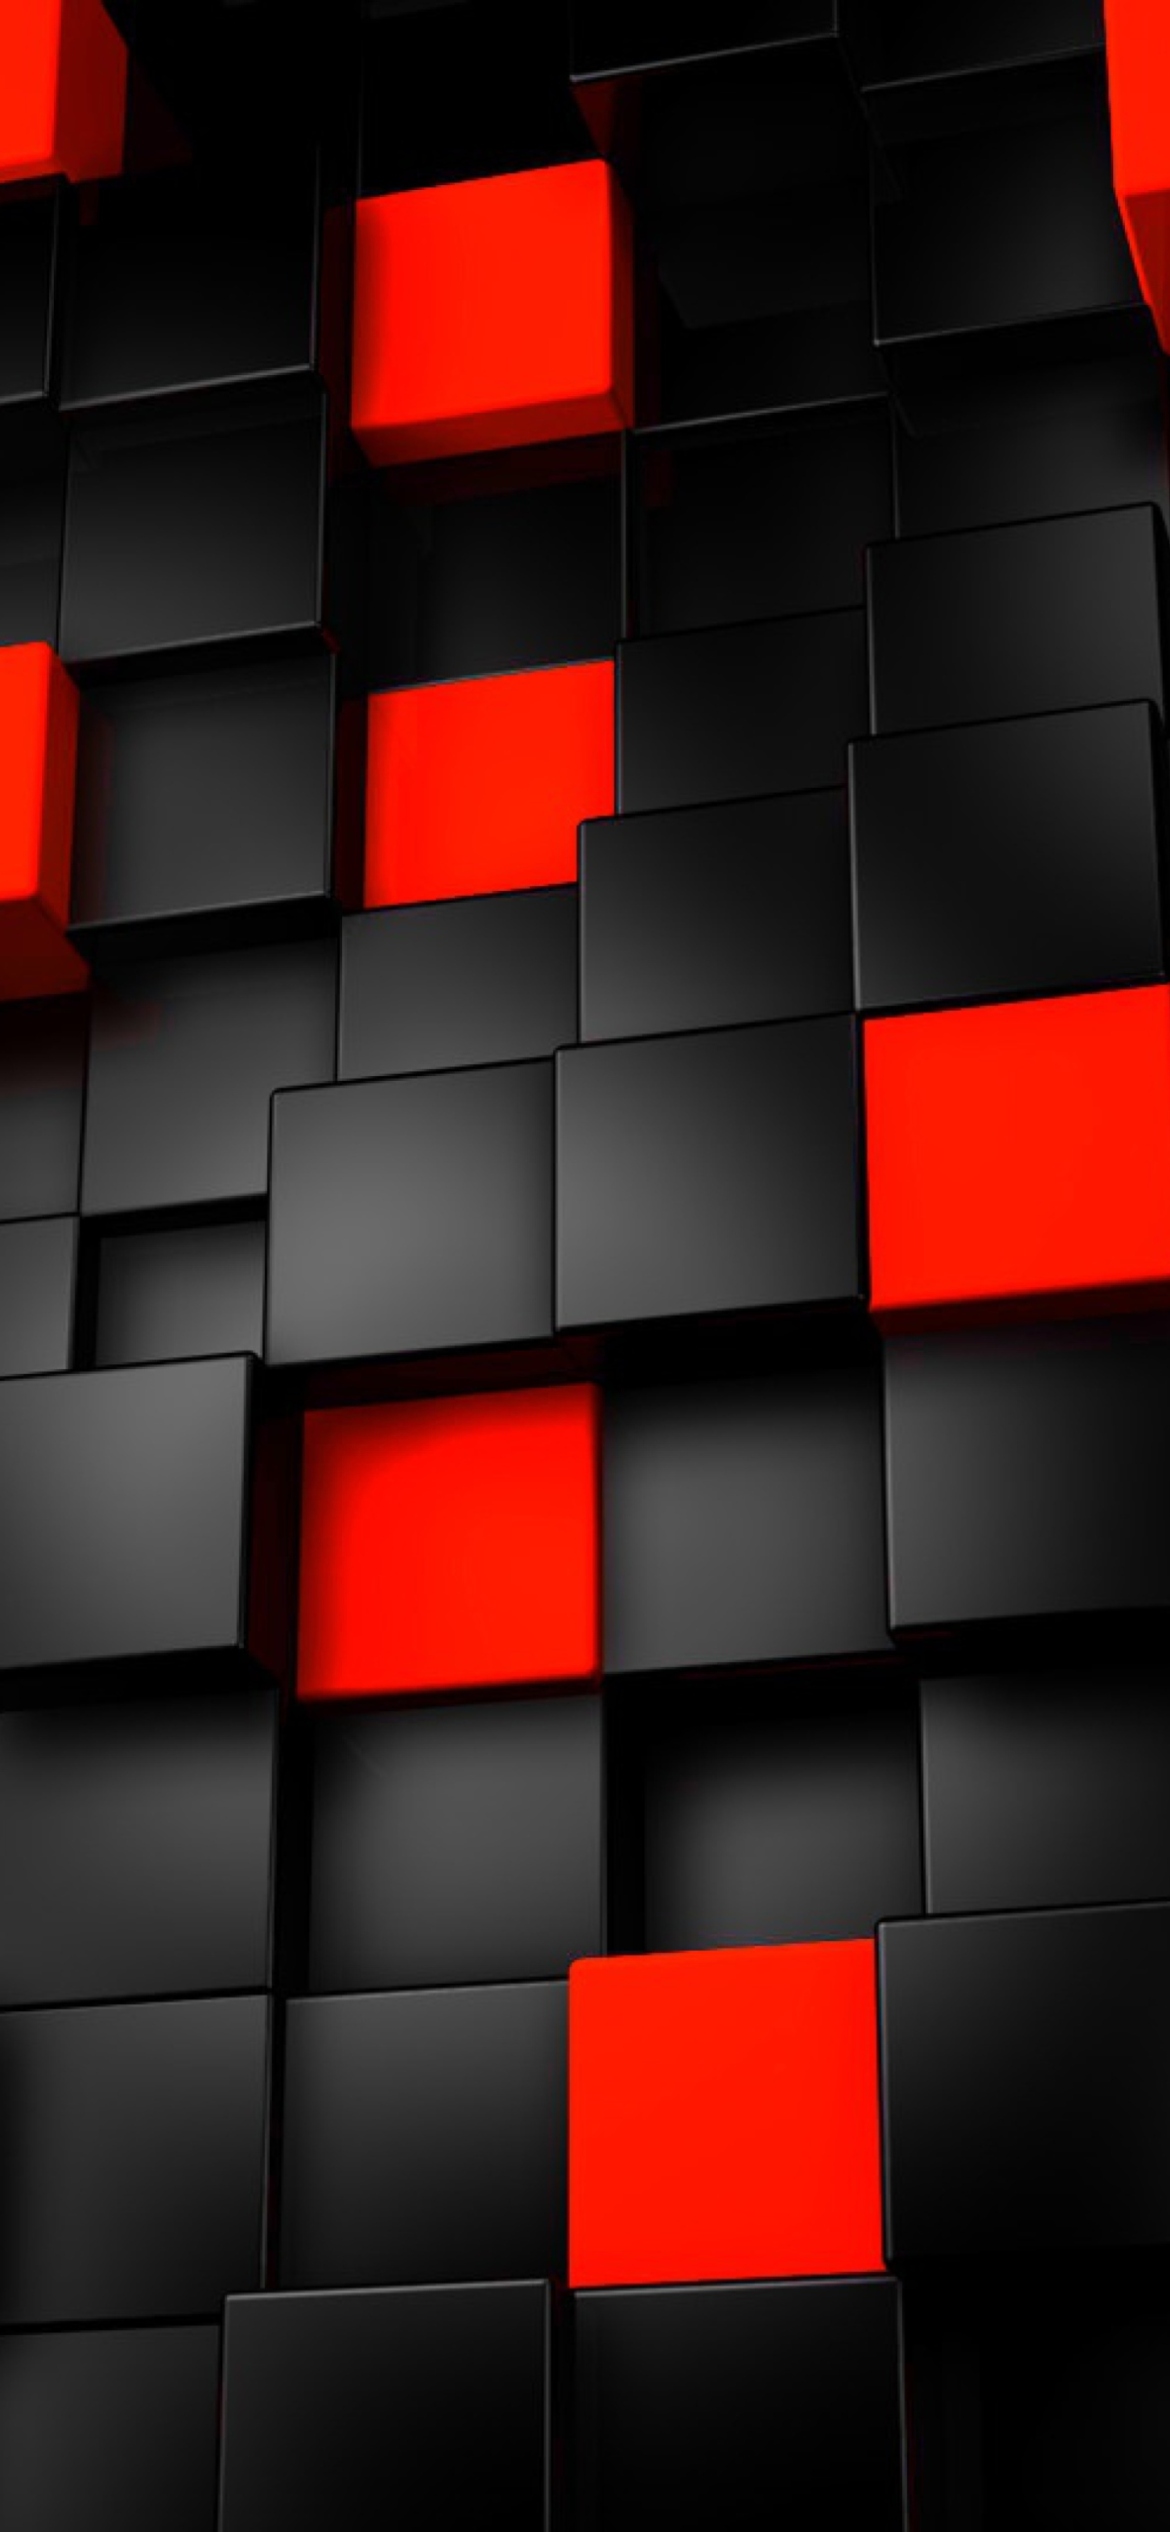 Abstract Black And Red Cubes wallpaper 1170x2532